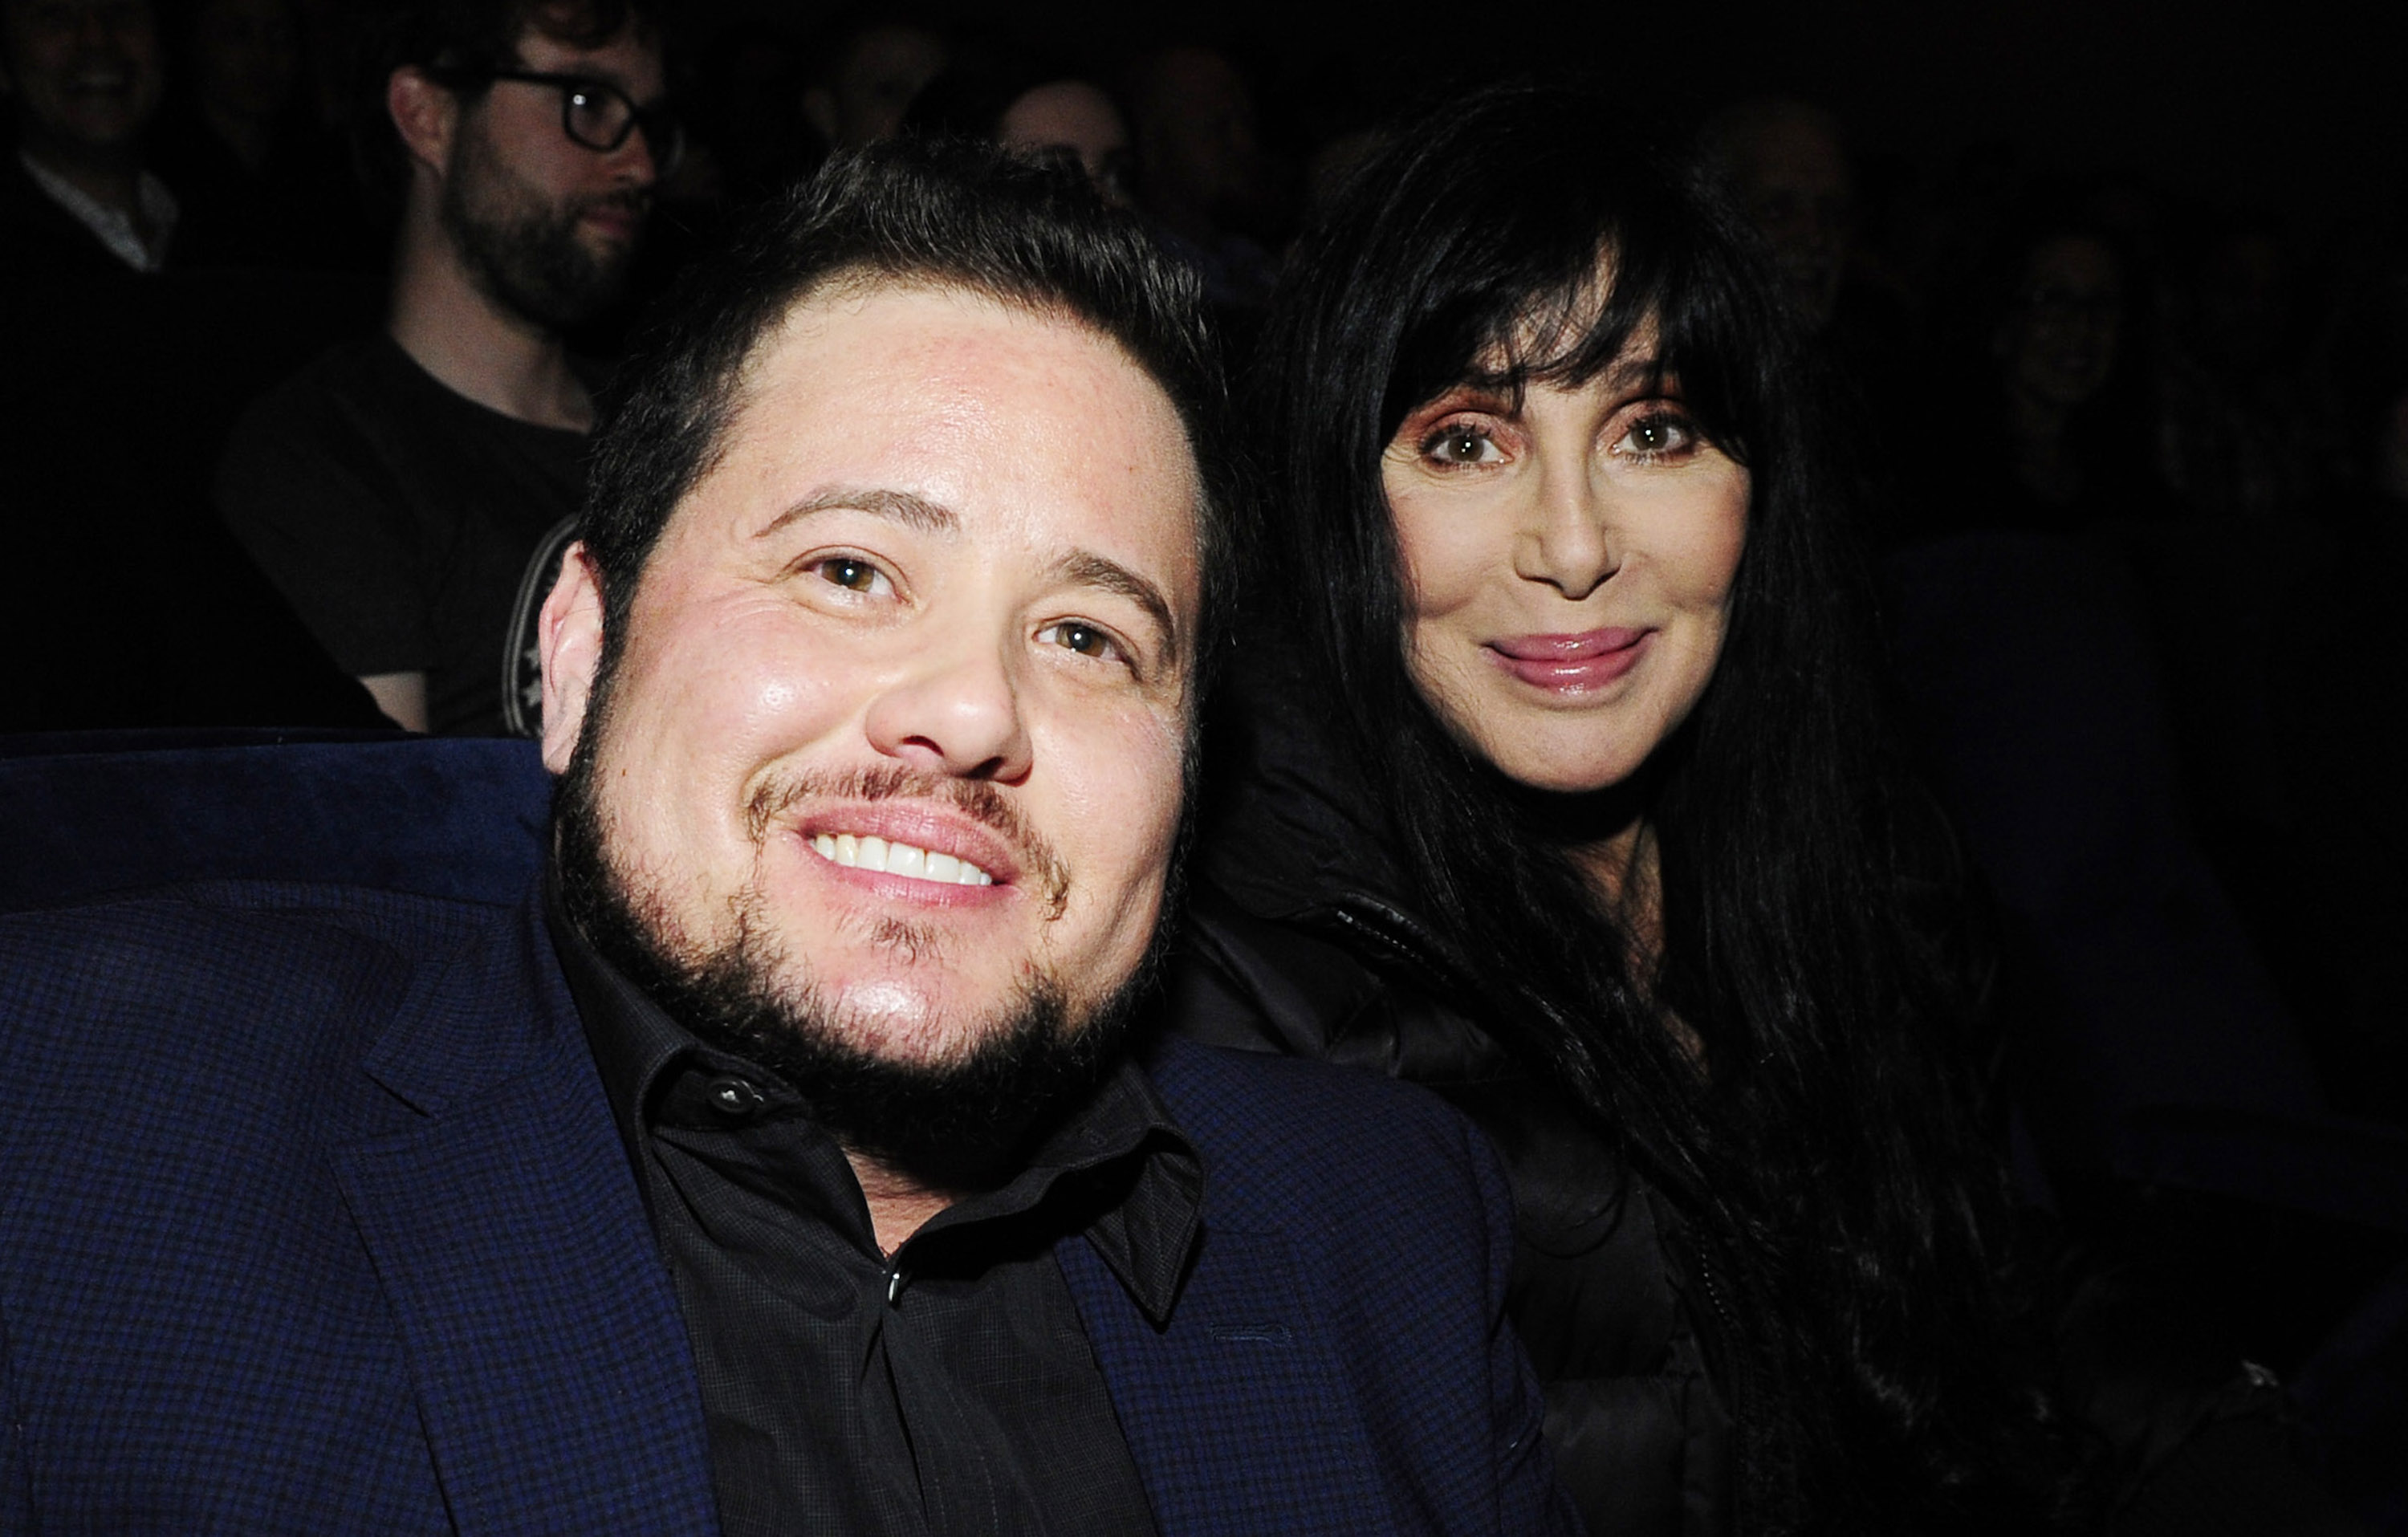 Chaz Bono and Cher at the Los Angeles Screening of "Dirty" in Beverly Hills, California, on March 1, 2015. | Source: Getty Images